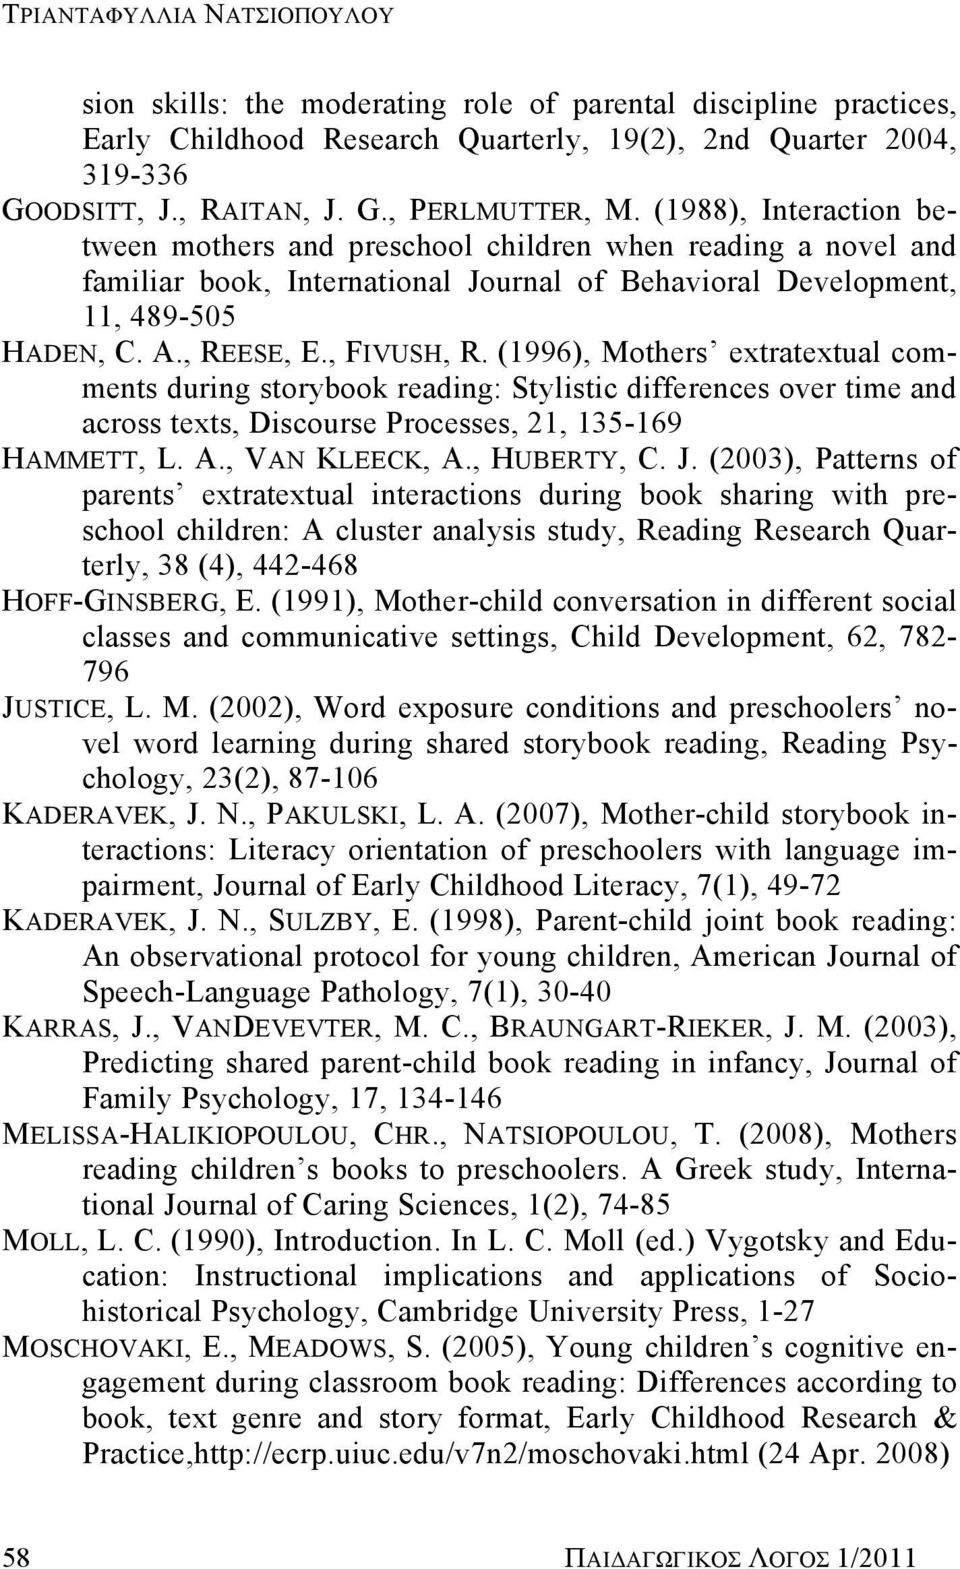 (1996), Mothers extratextual comments during storybook reading: Stylistic differences over time and across texts, Discourse Processes, 21, 135-169 HAMMETT, L. A., VAN KLEECK, A., HUBERTY, C. J.